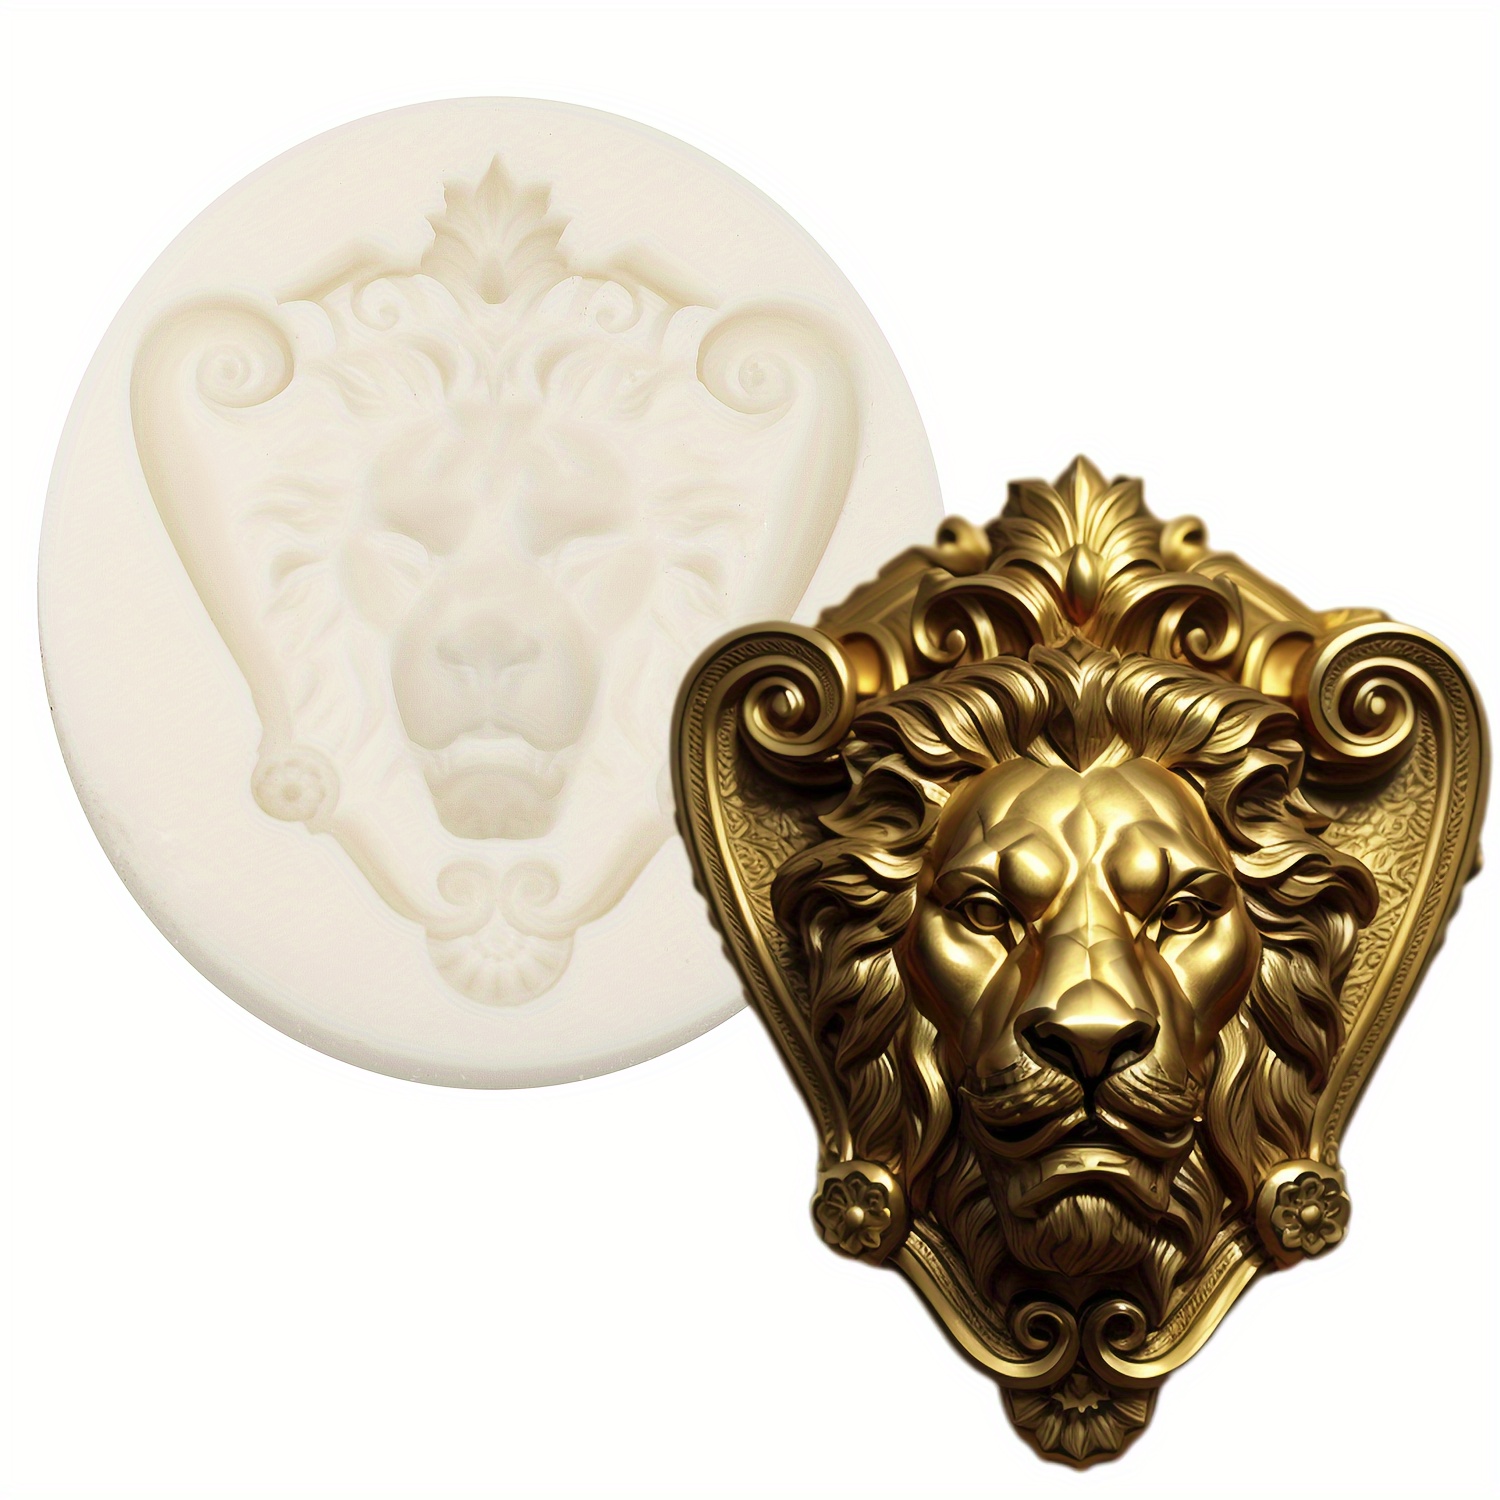 

1pc, Vintage Lion Sign Fondant Mold, 3d Silicone Mold, Candy Mold, Chocolate Mold, For Diy Cake Decorating Tool, Baking Tools, Kitchen Accessories